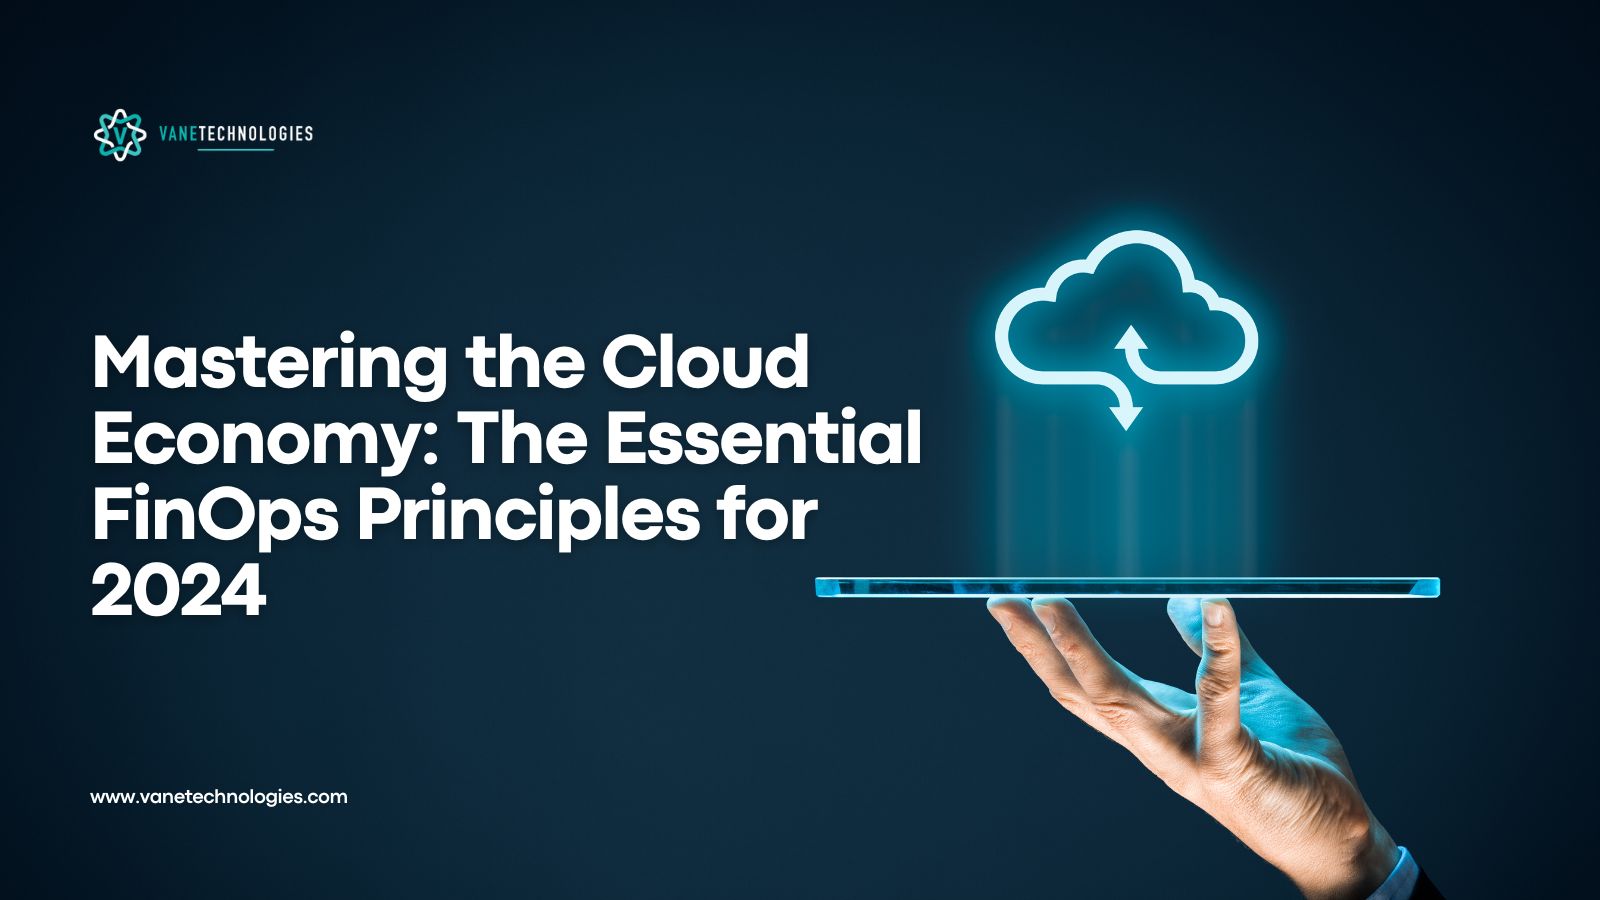 Mastering the Cloud Economy: The Essential FinOps Principles for 2024